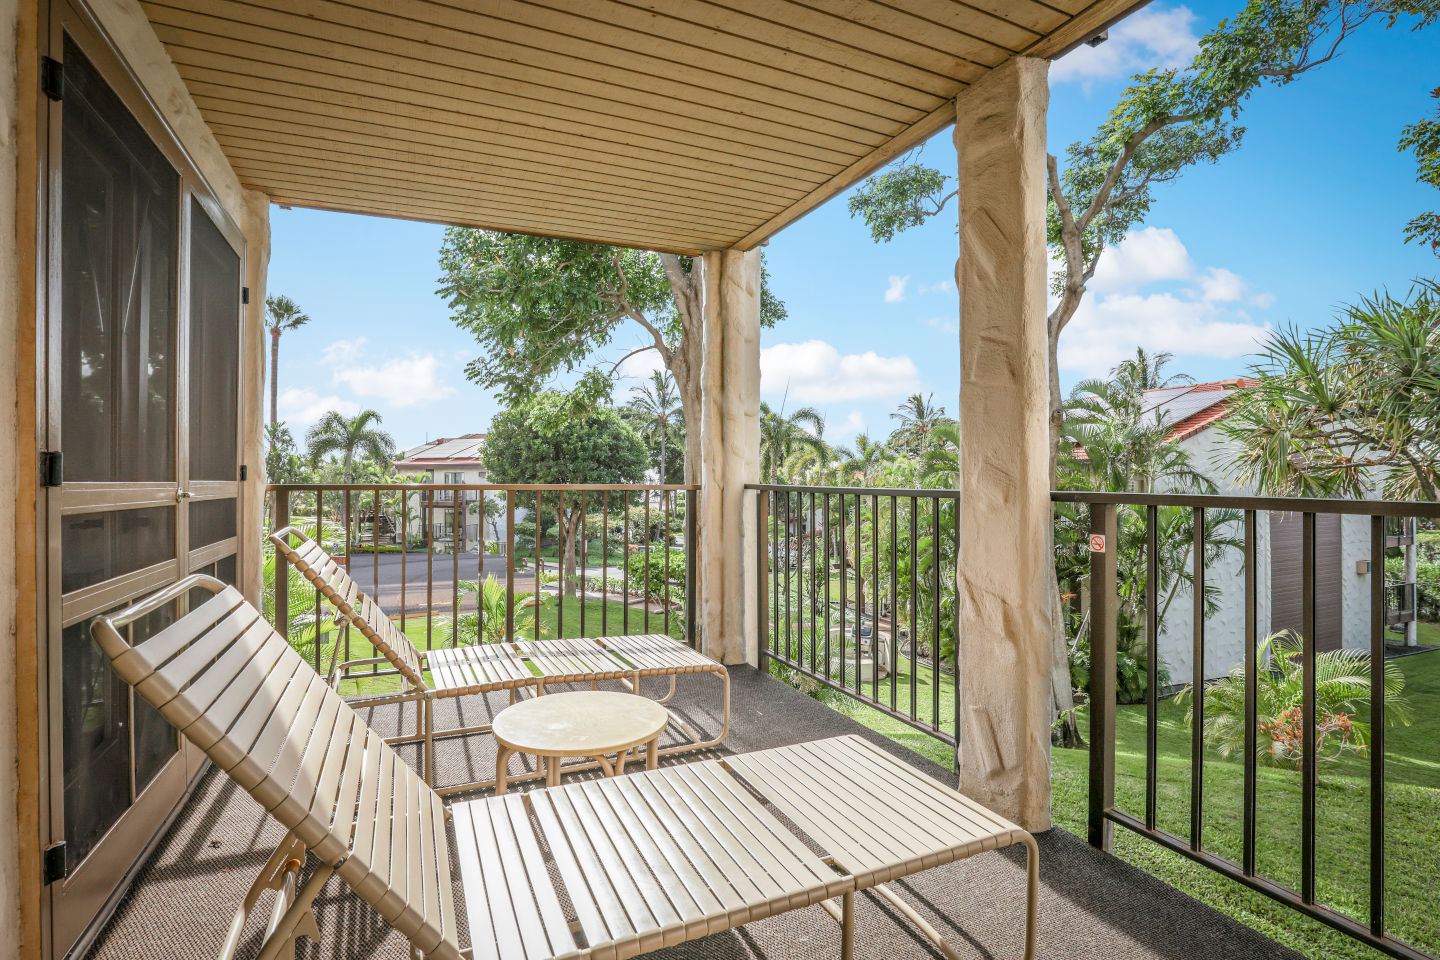 Covered lanai with railing, two outdoor lounge chairs and a table